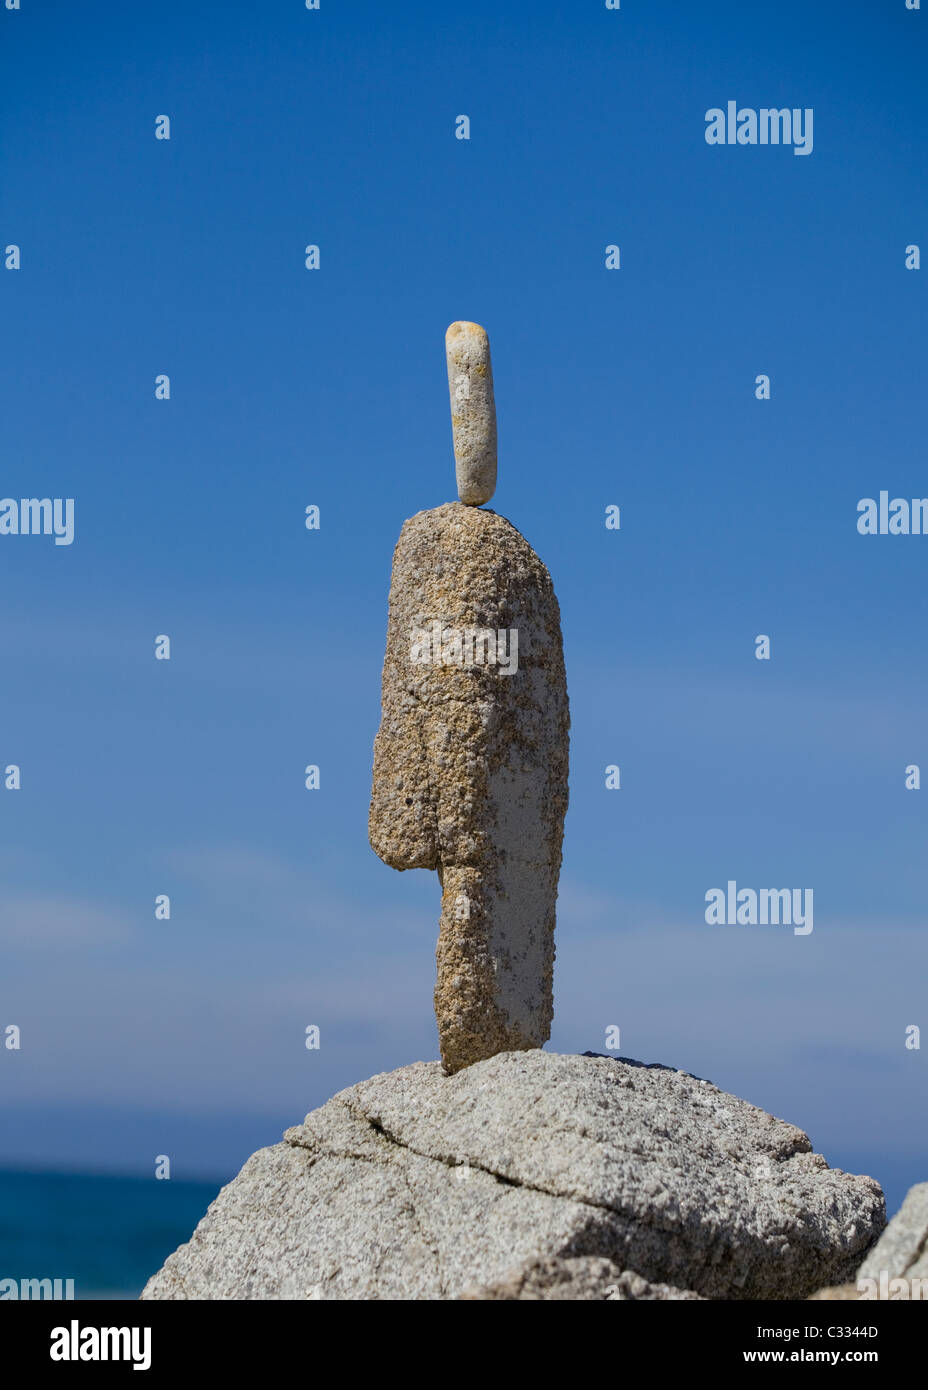 Rock balancing - finely balanced and creative stone stacking on the coast of central California Stock Photo